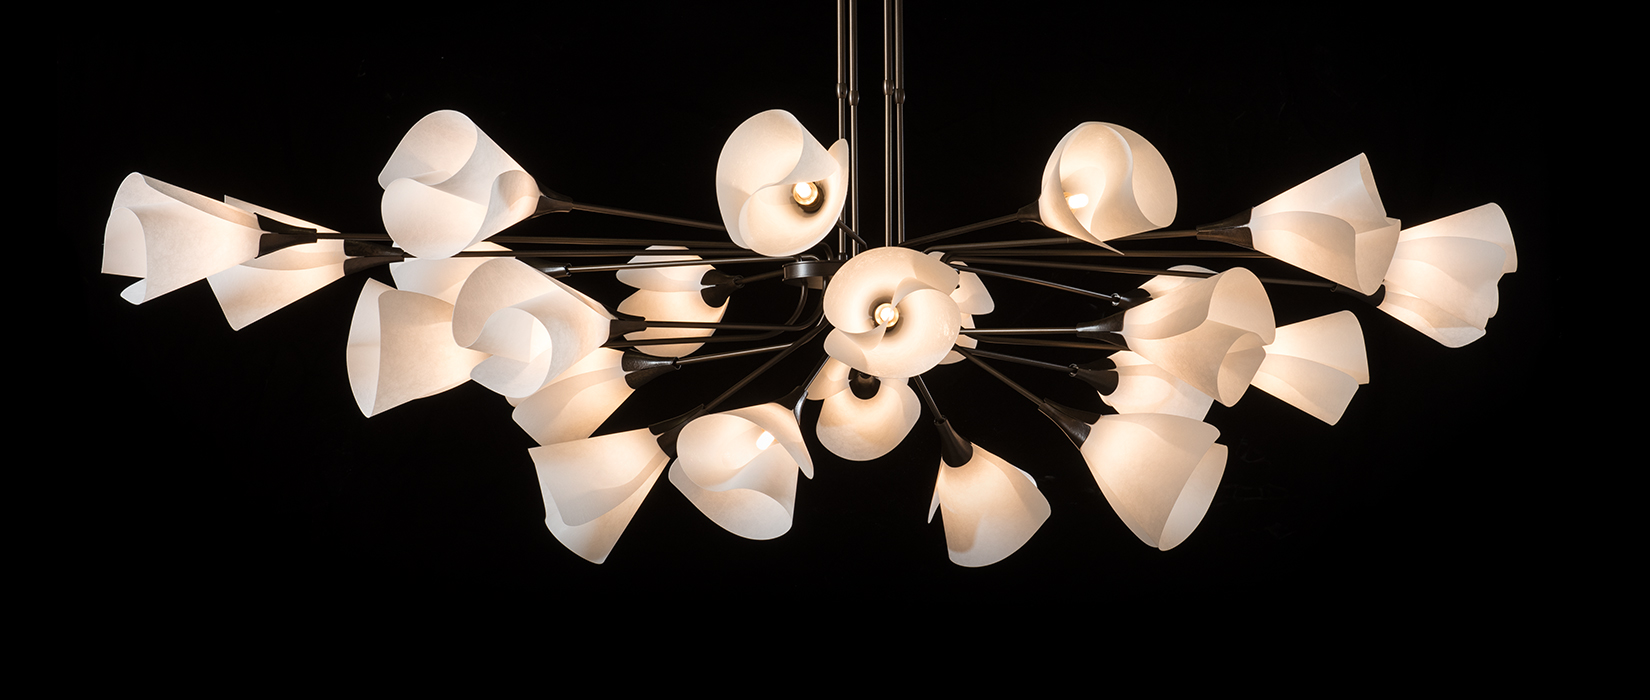 An Example of Large Pendant Lighting for High Ceilings, Inspired by Nature